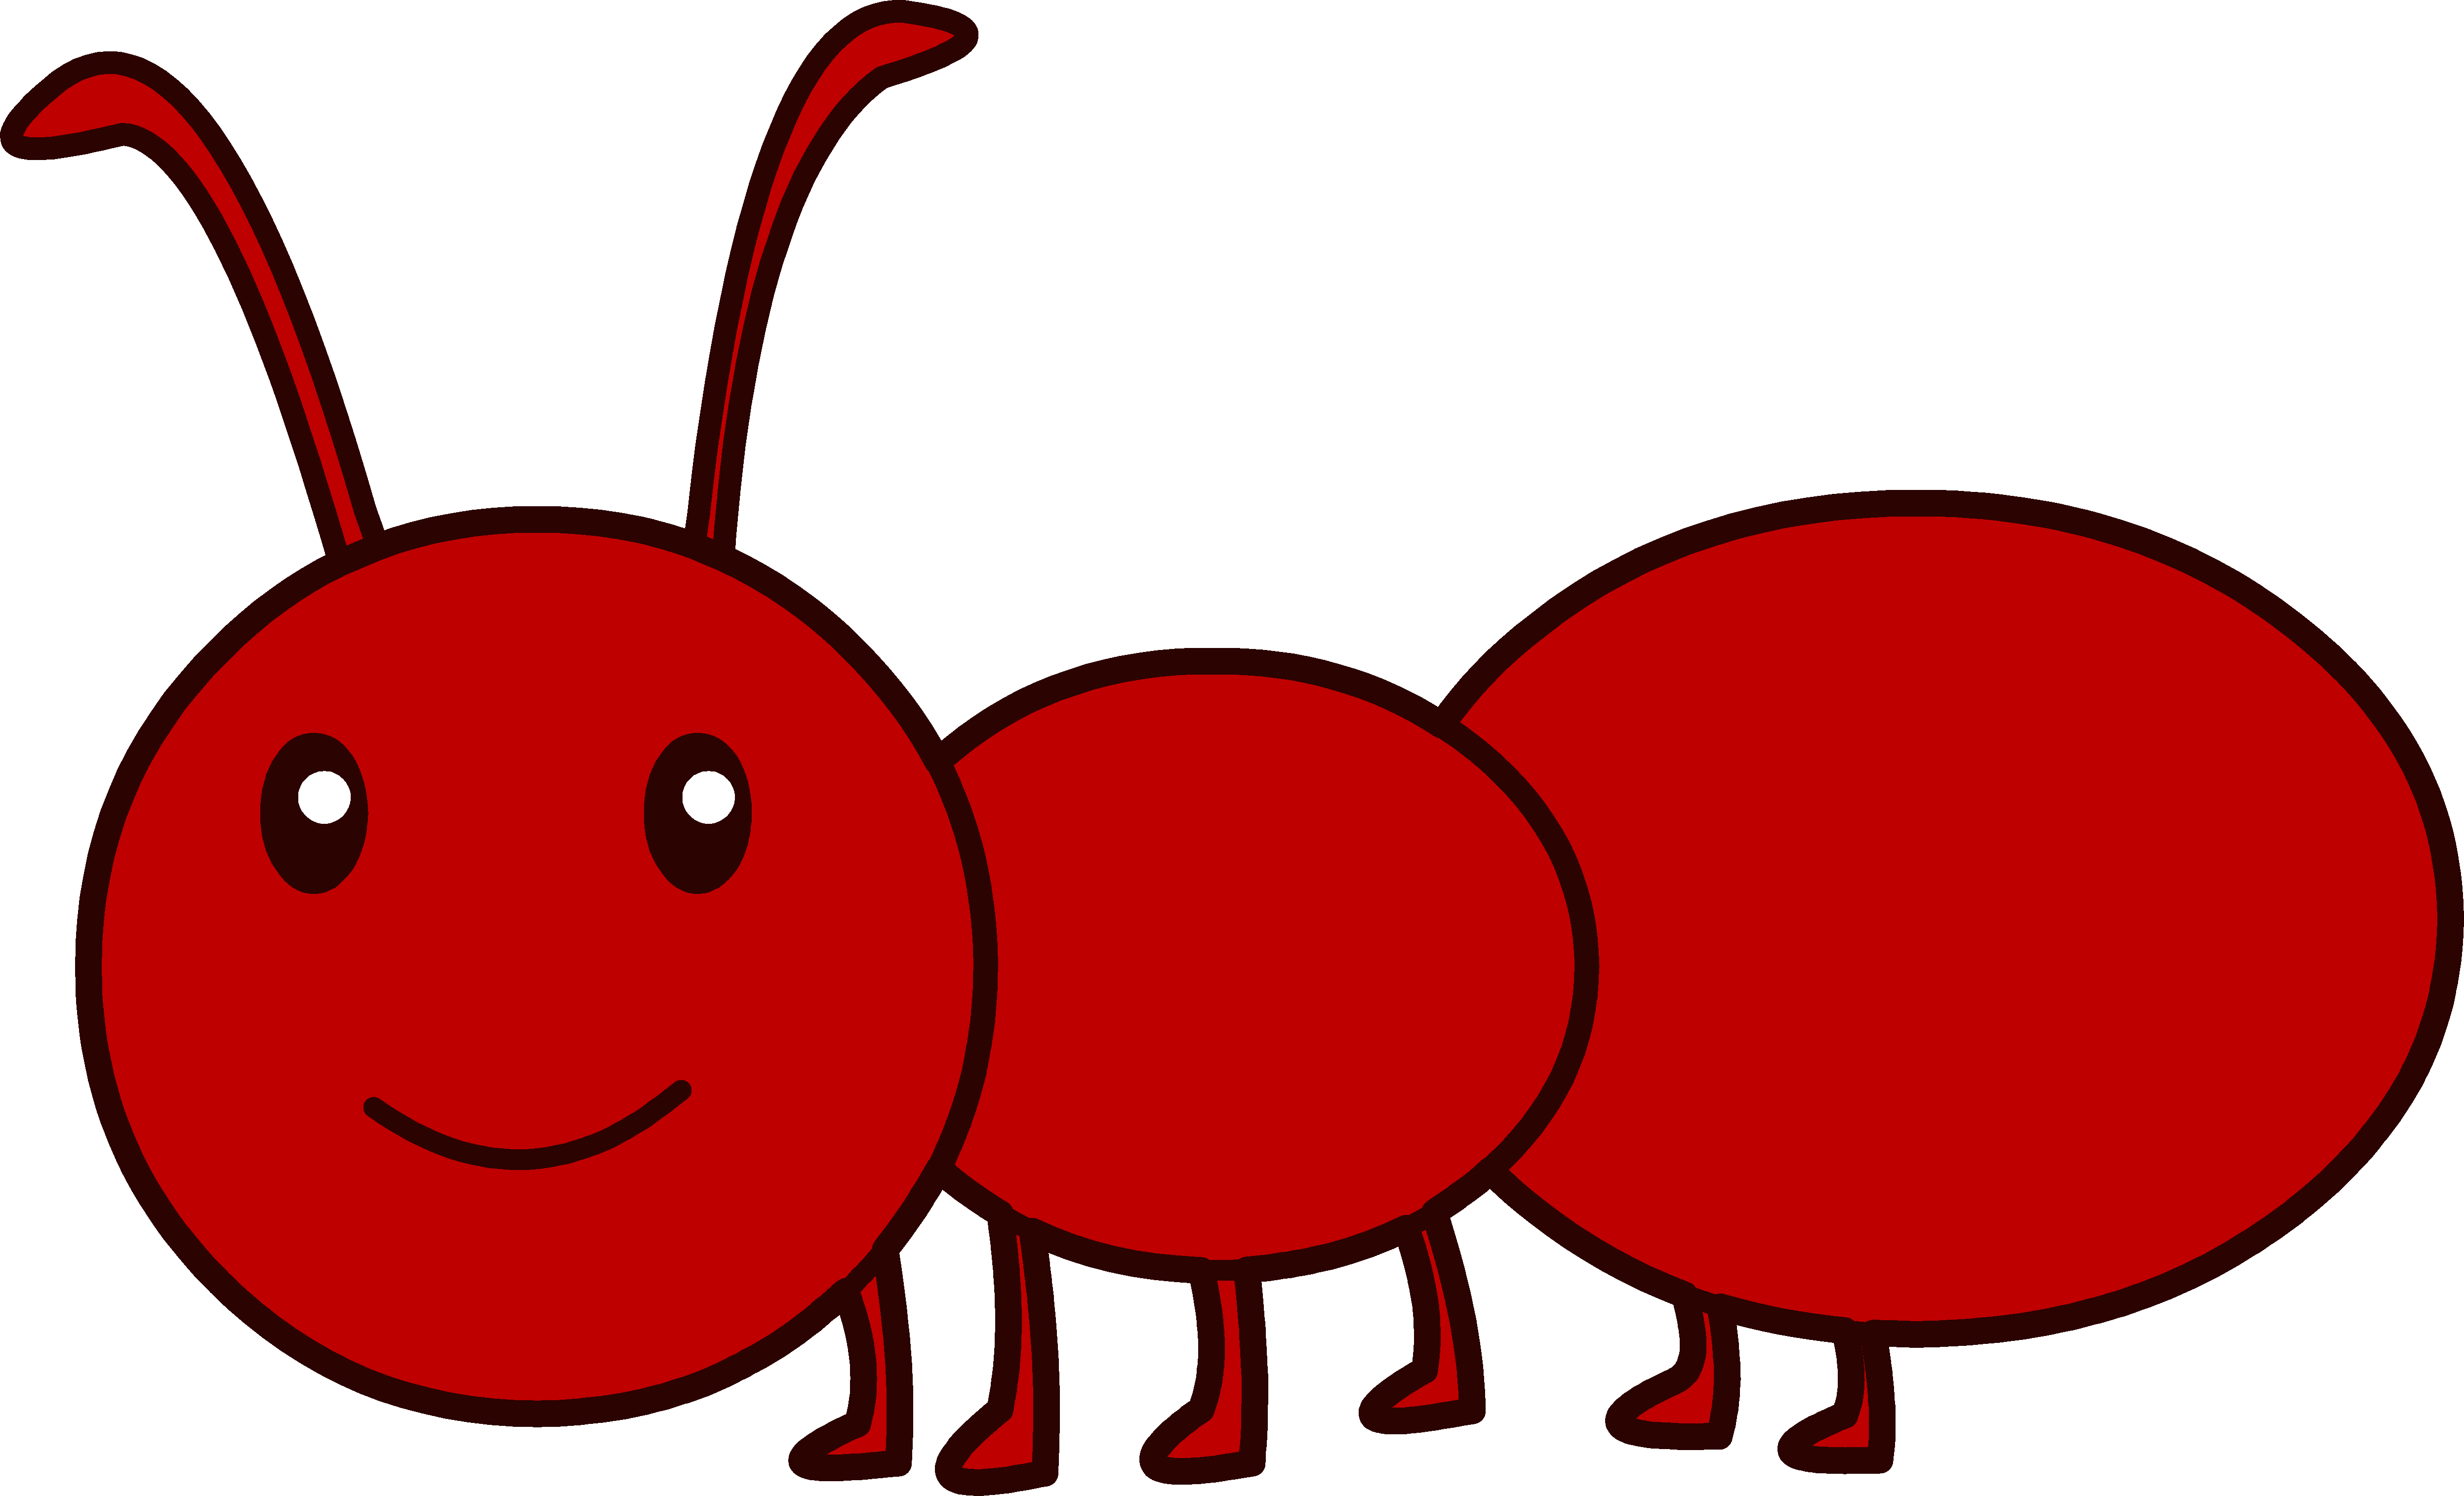 Ants clipart printable. Cute red ant free